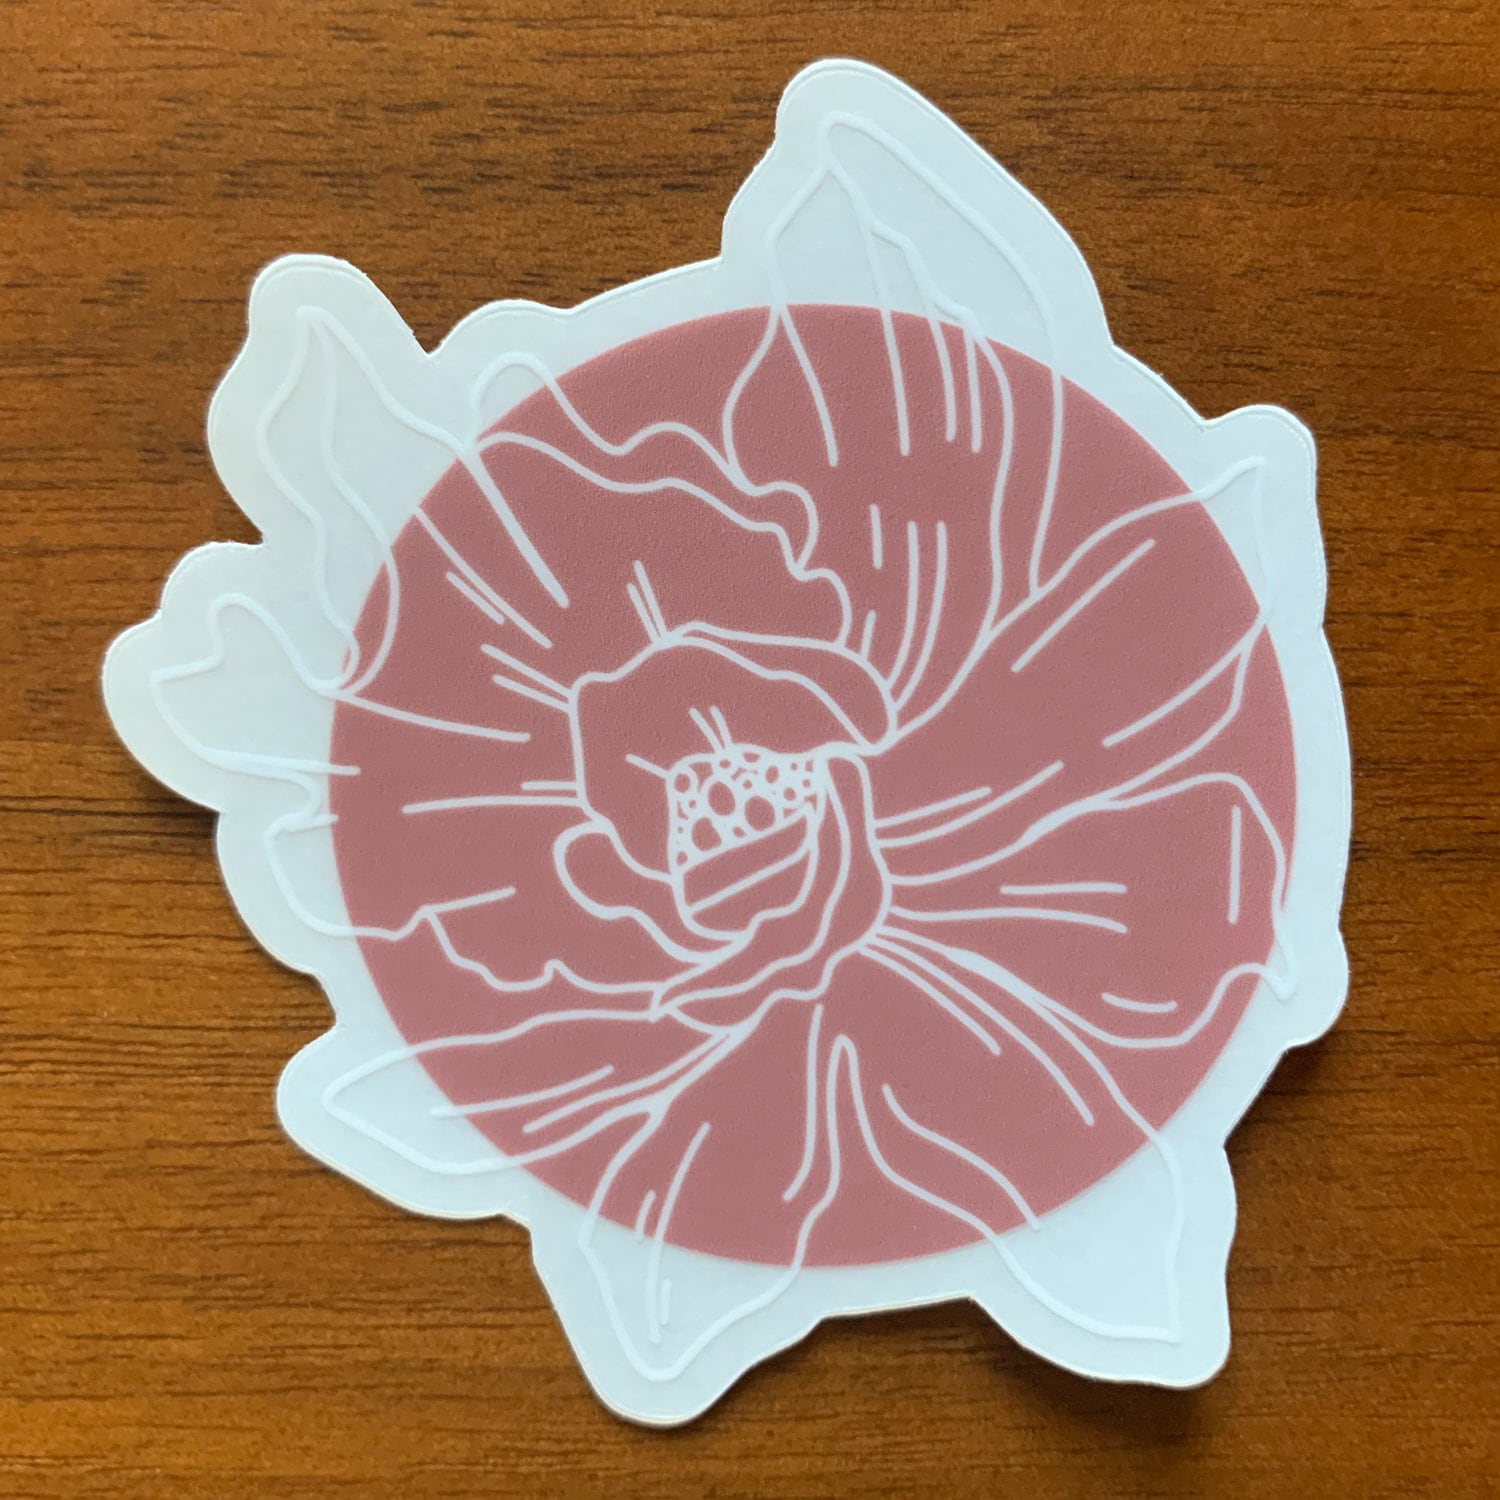 Blush Anemone Flower 3" Clear Background Vinyl Sticker for Water Bottles, Laptops, Phone Cases, & More **FREE USA SHIPPING**